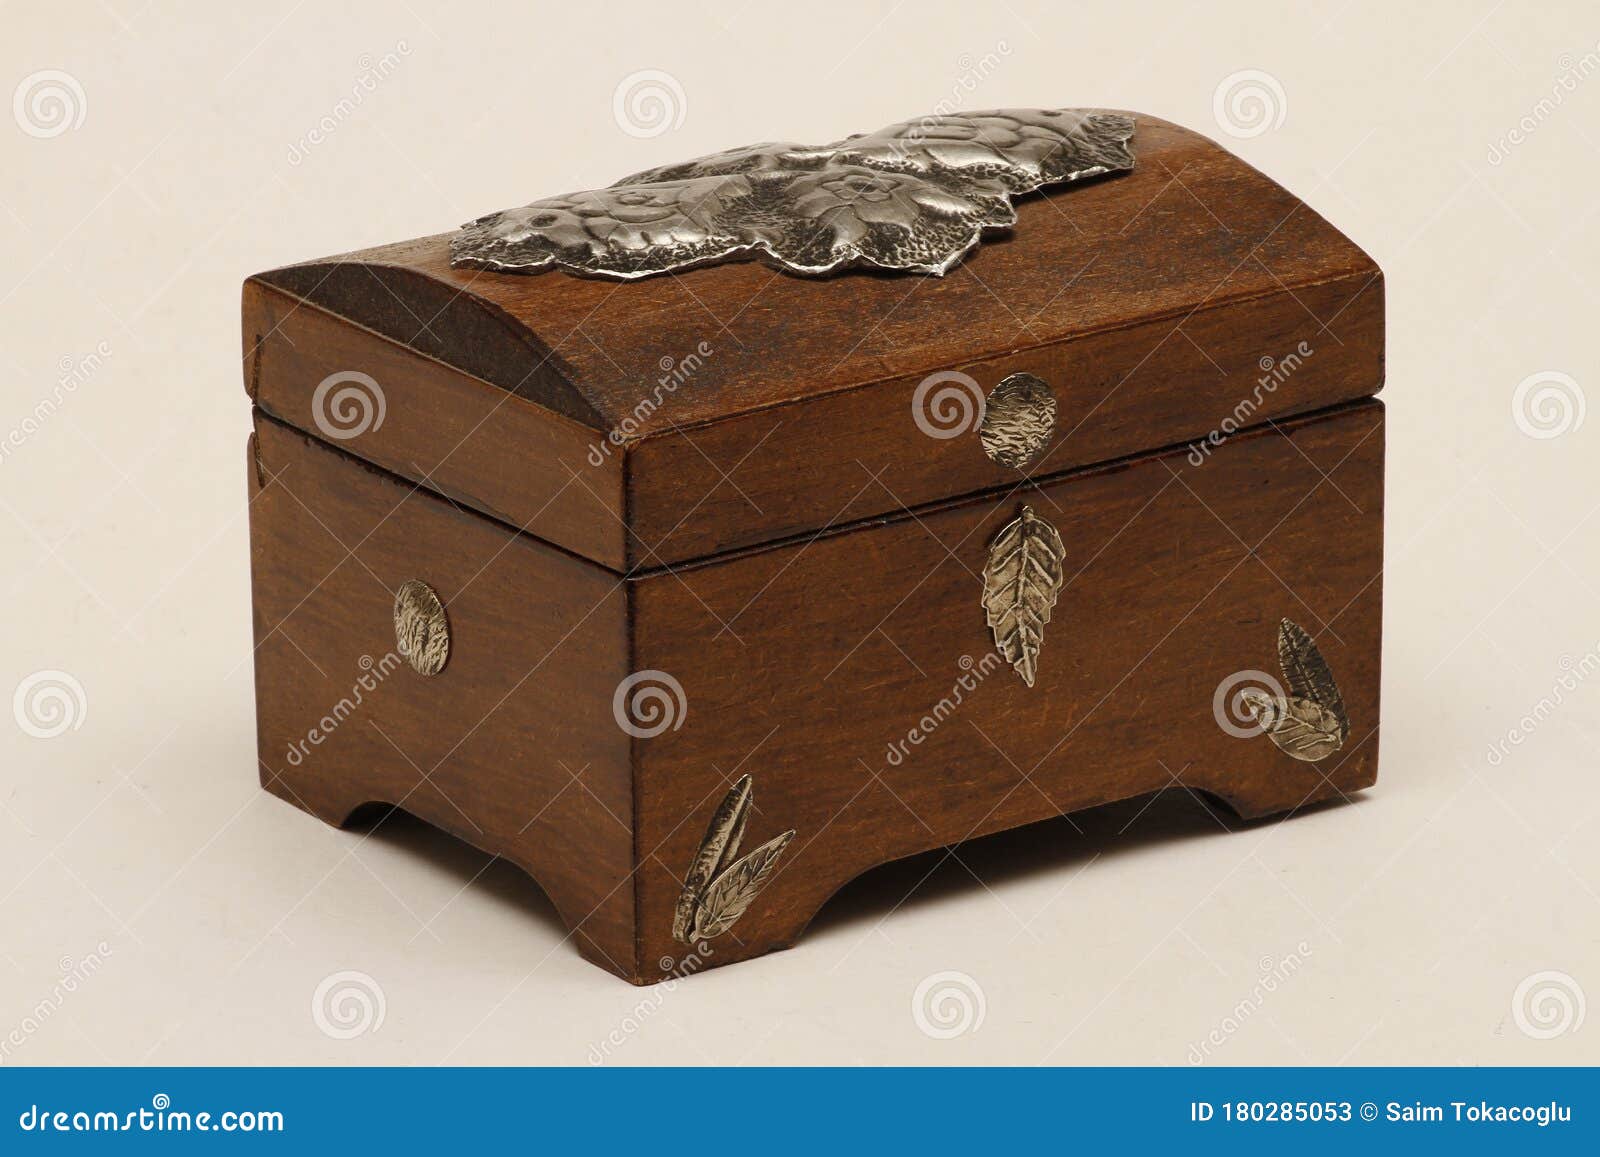 jewelry box made of wood with additional workmanship and decorated.